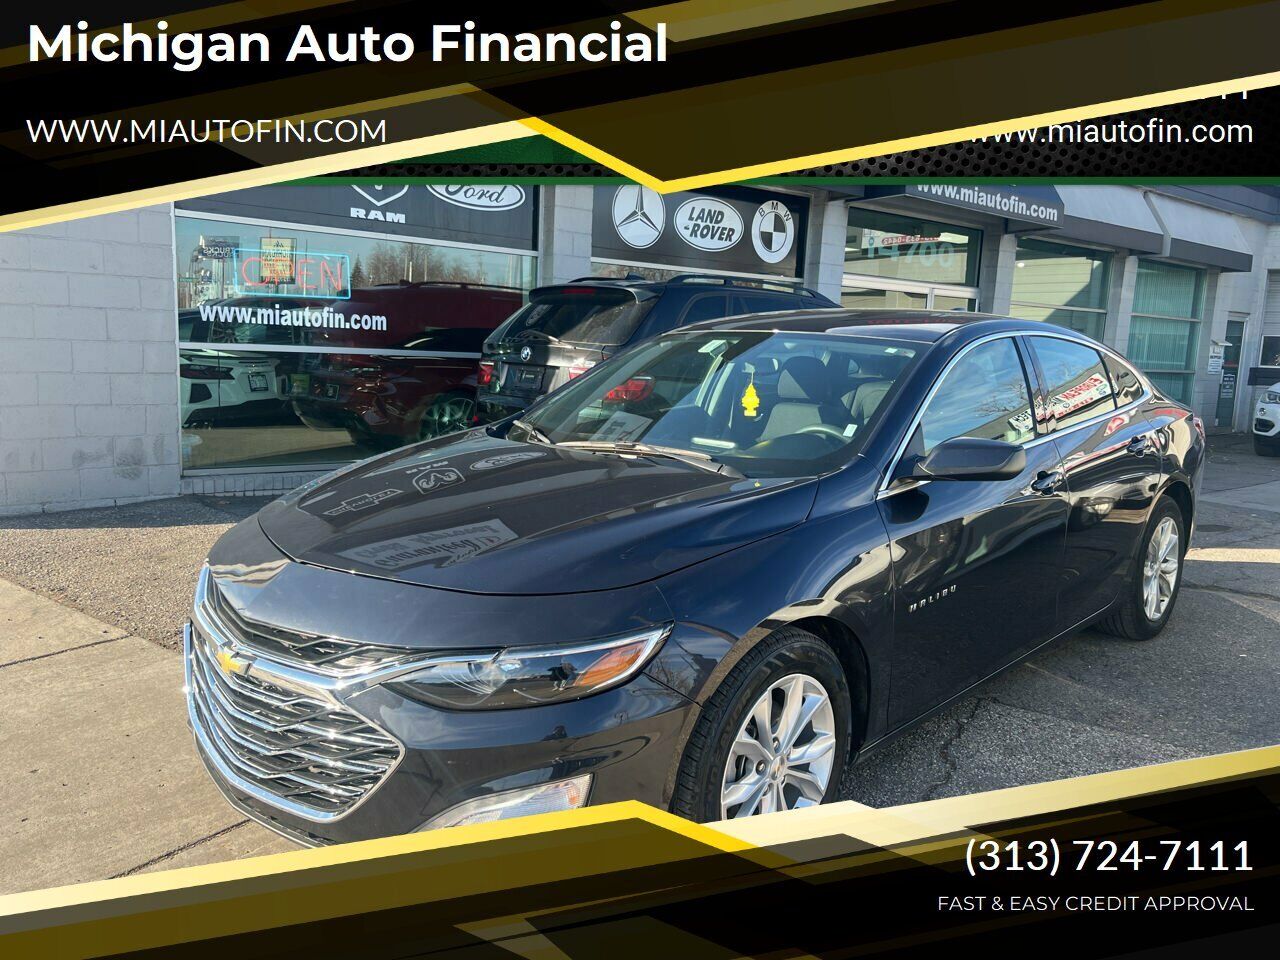 2022 Chevrolet Malibu, Black with 34395 Miles available now!